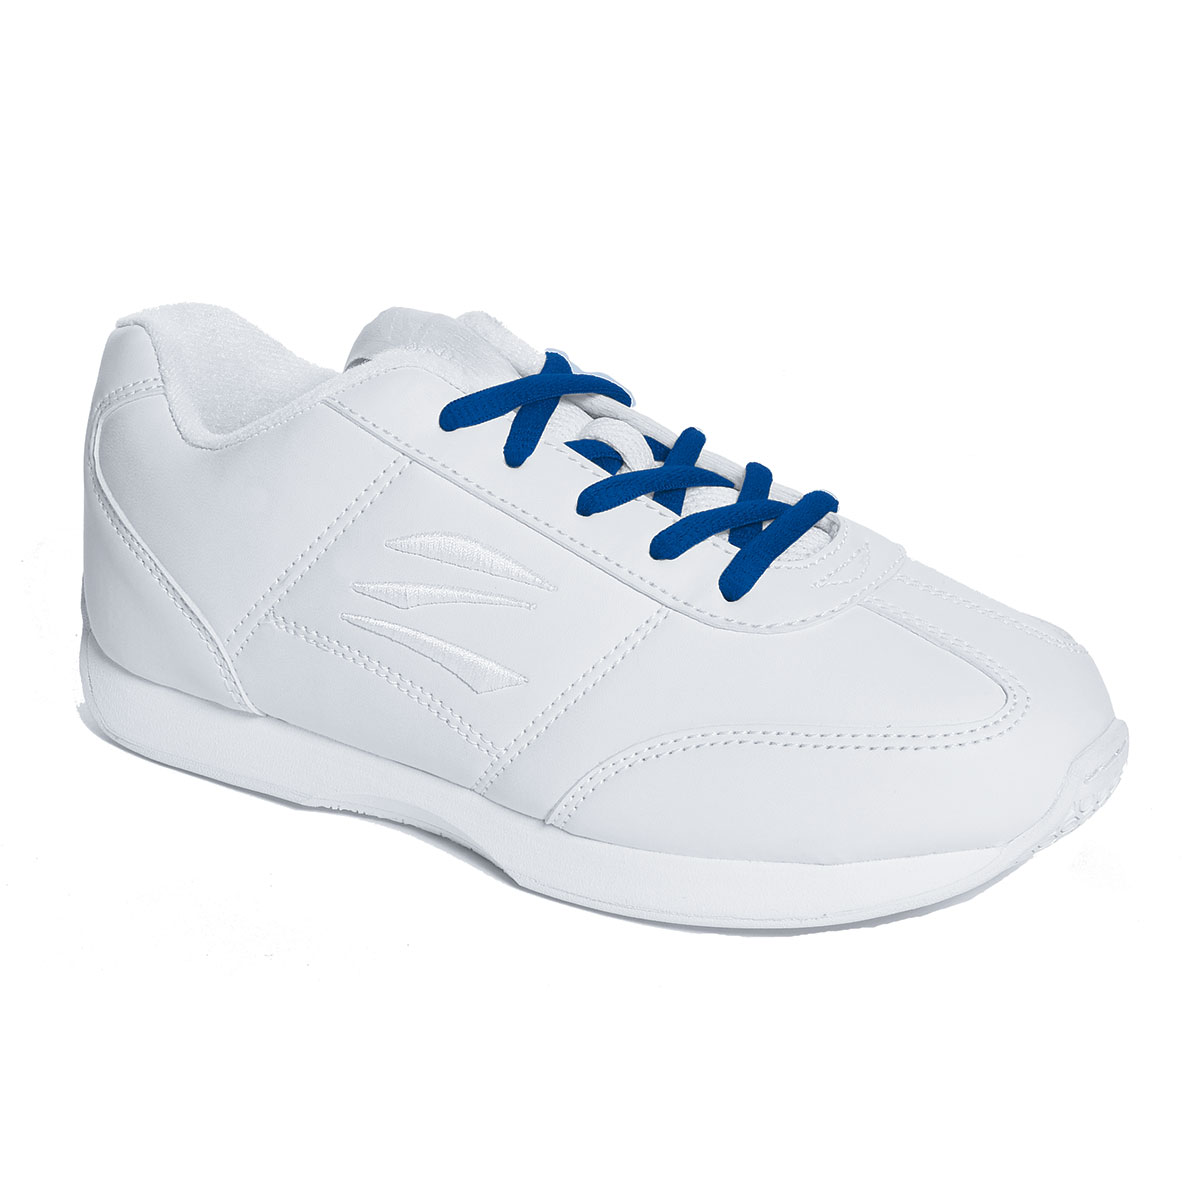 zephz butterfly light cheer shoes